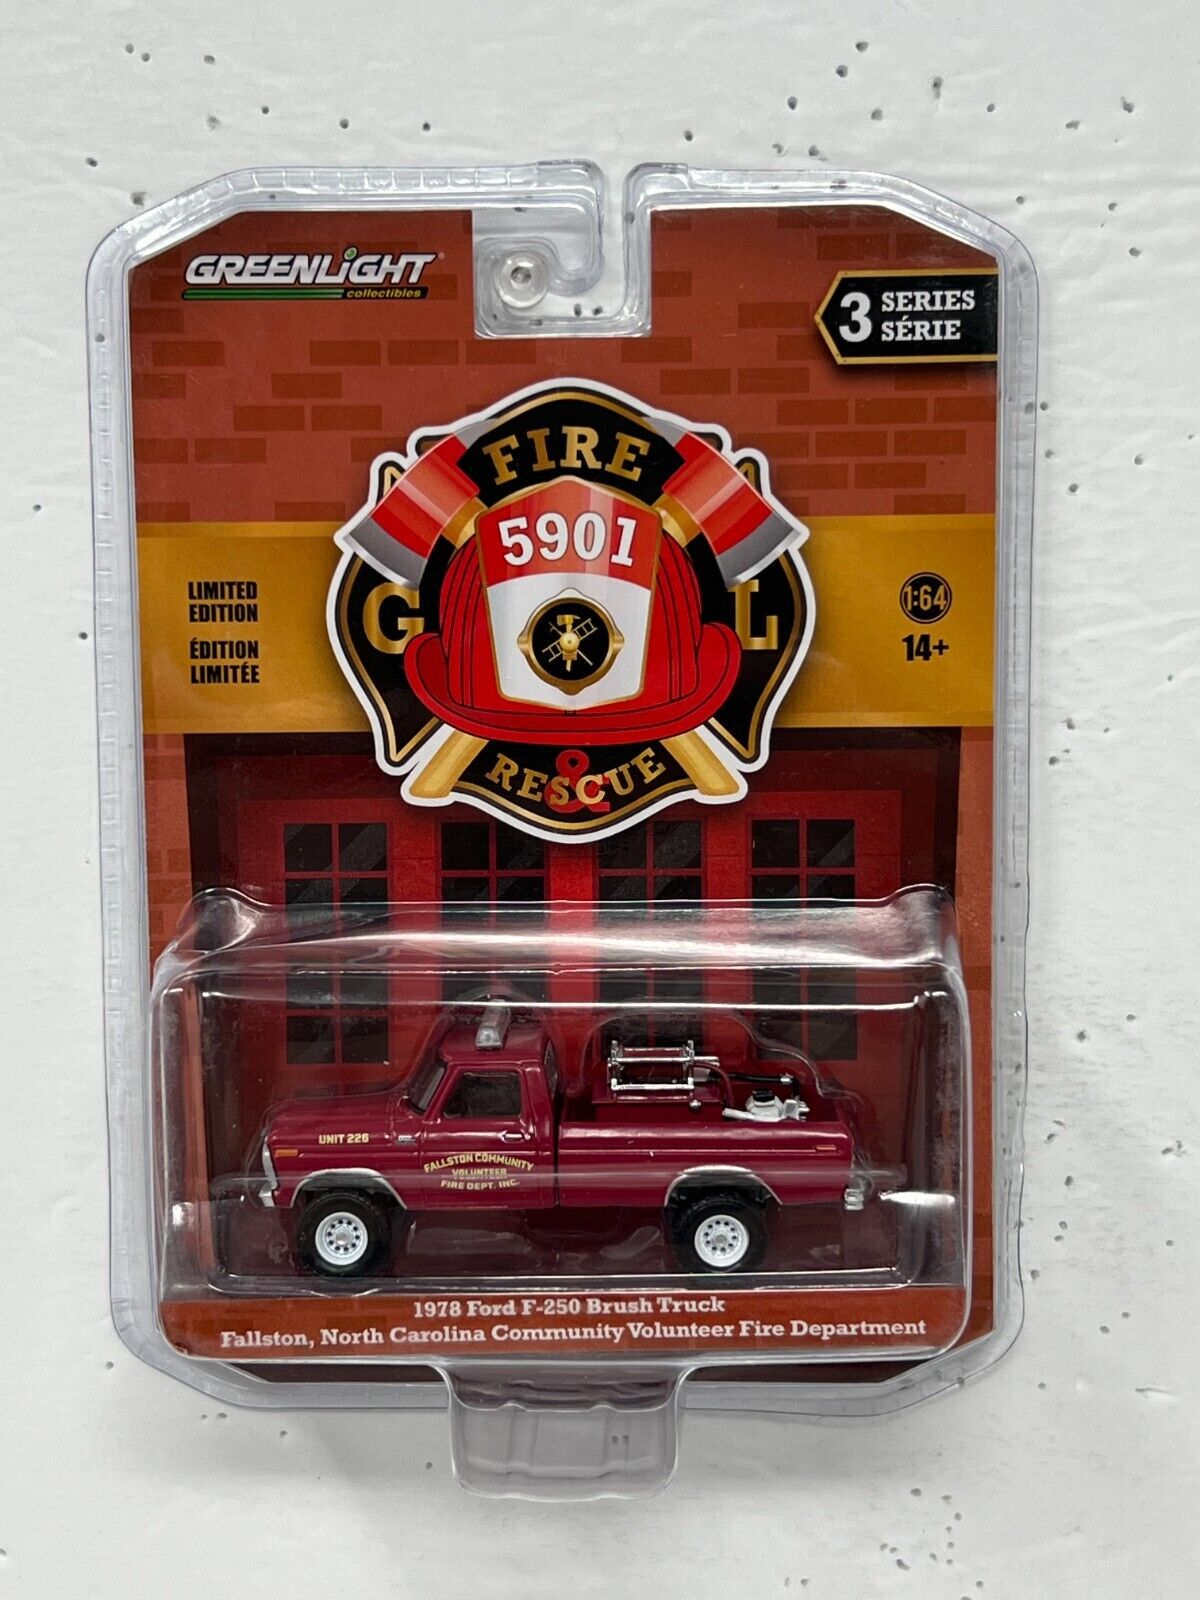 Greenlight Fire & Rescue 1978 Ford F-250 Brush Truck 1:64 Diecast